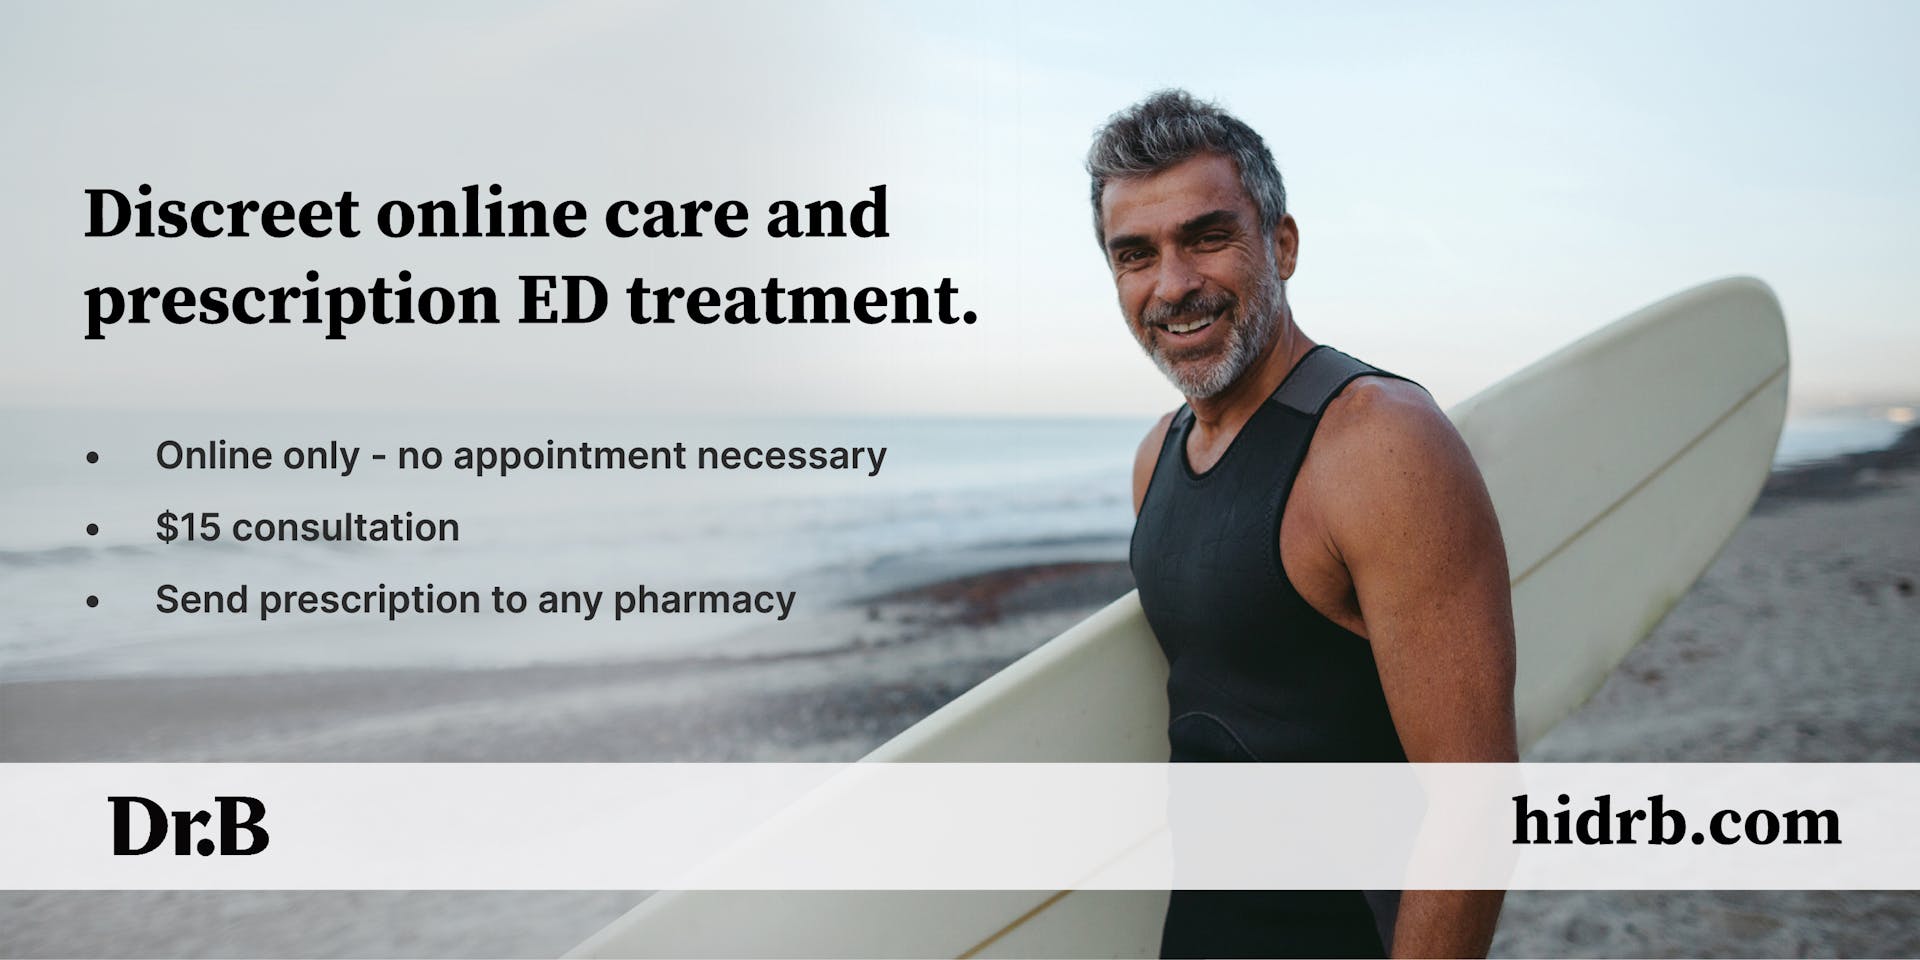 Banner advertising Dr. B's services for erectile dysfunction treatments